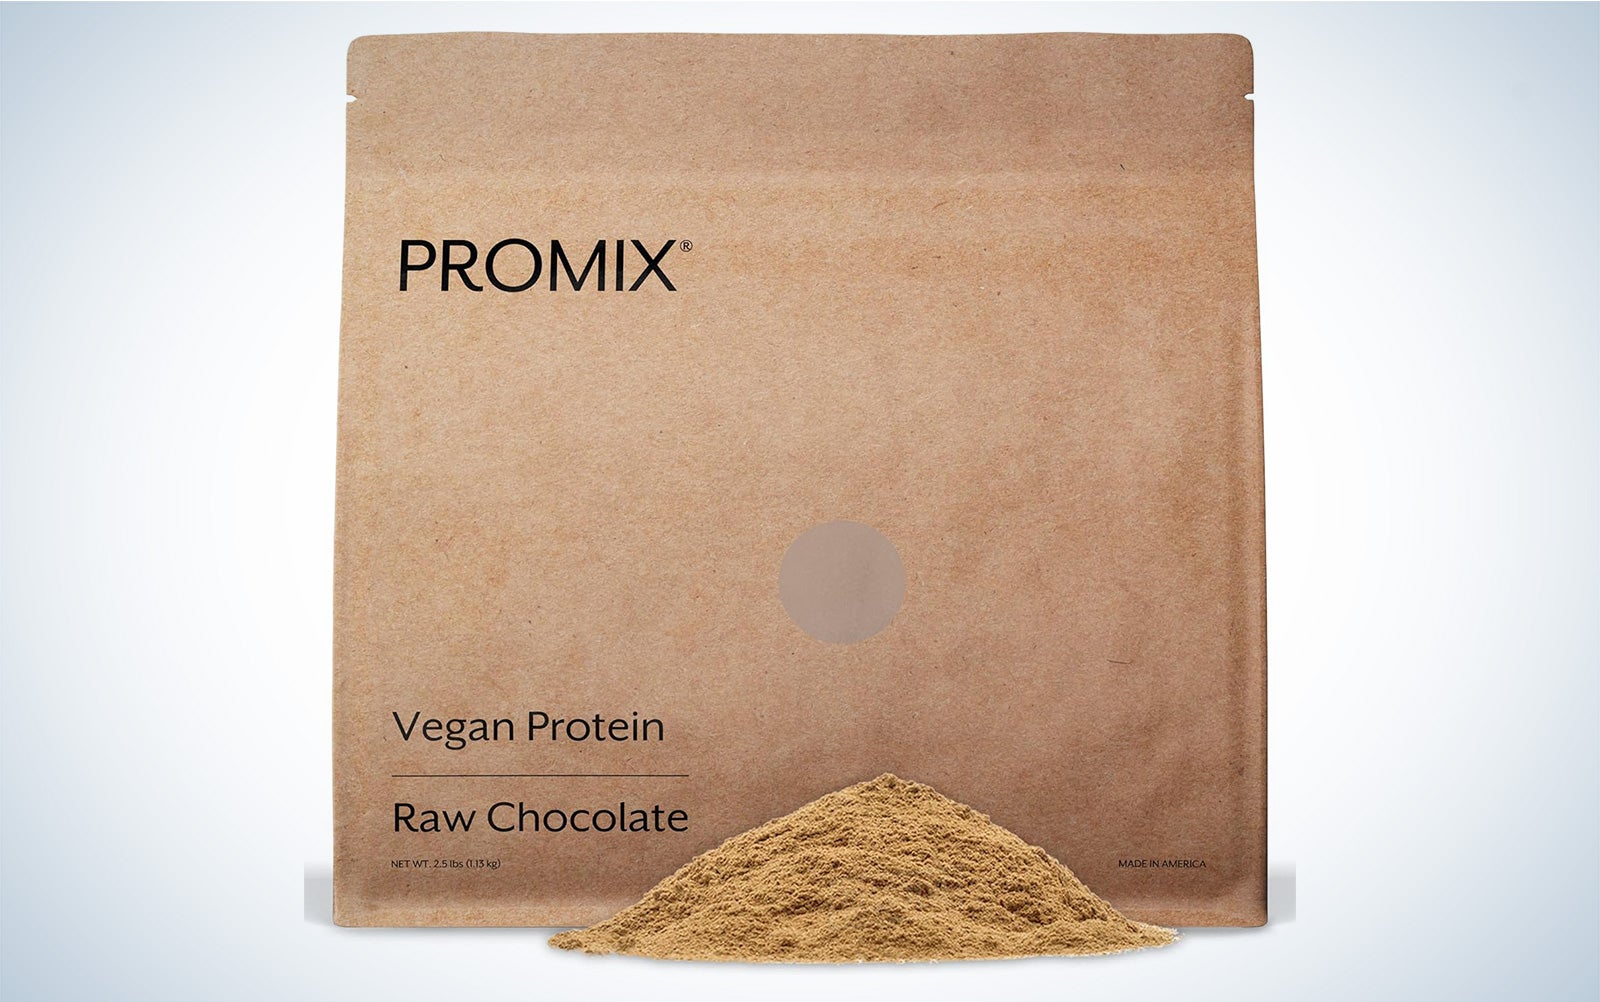 Promix vegan protein with a pile of powder